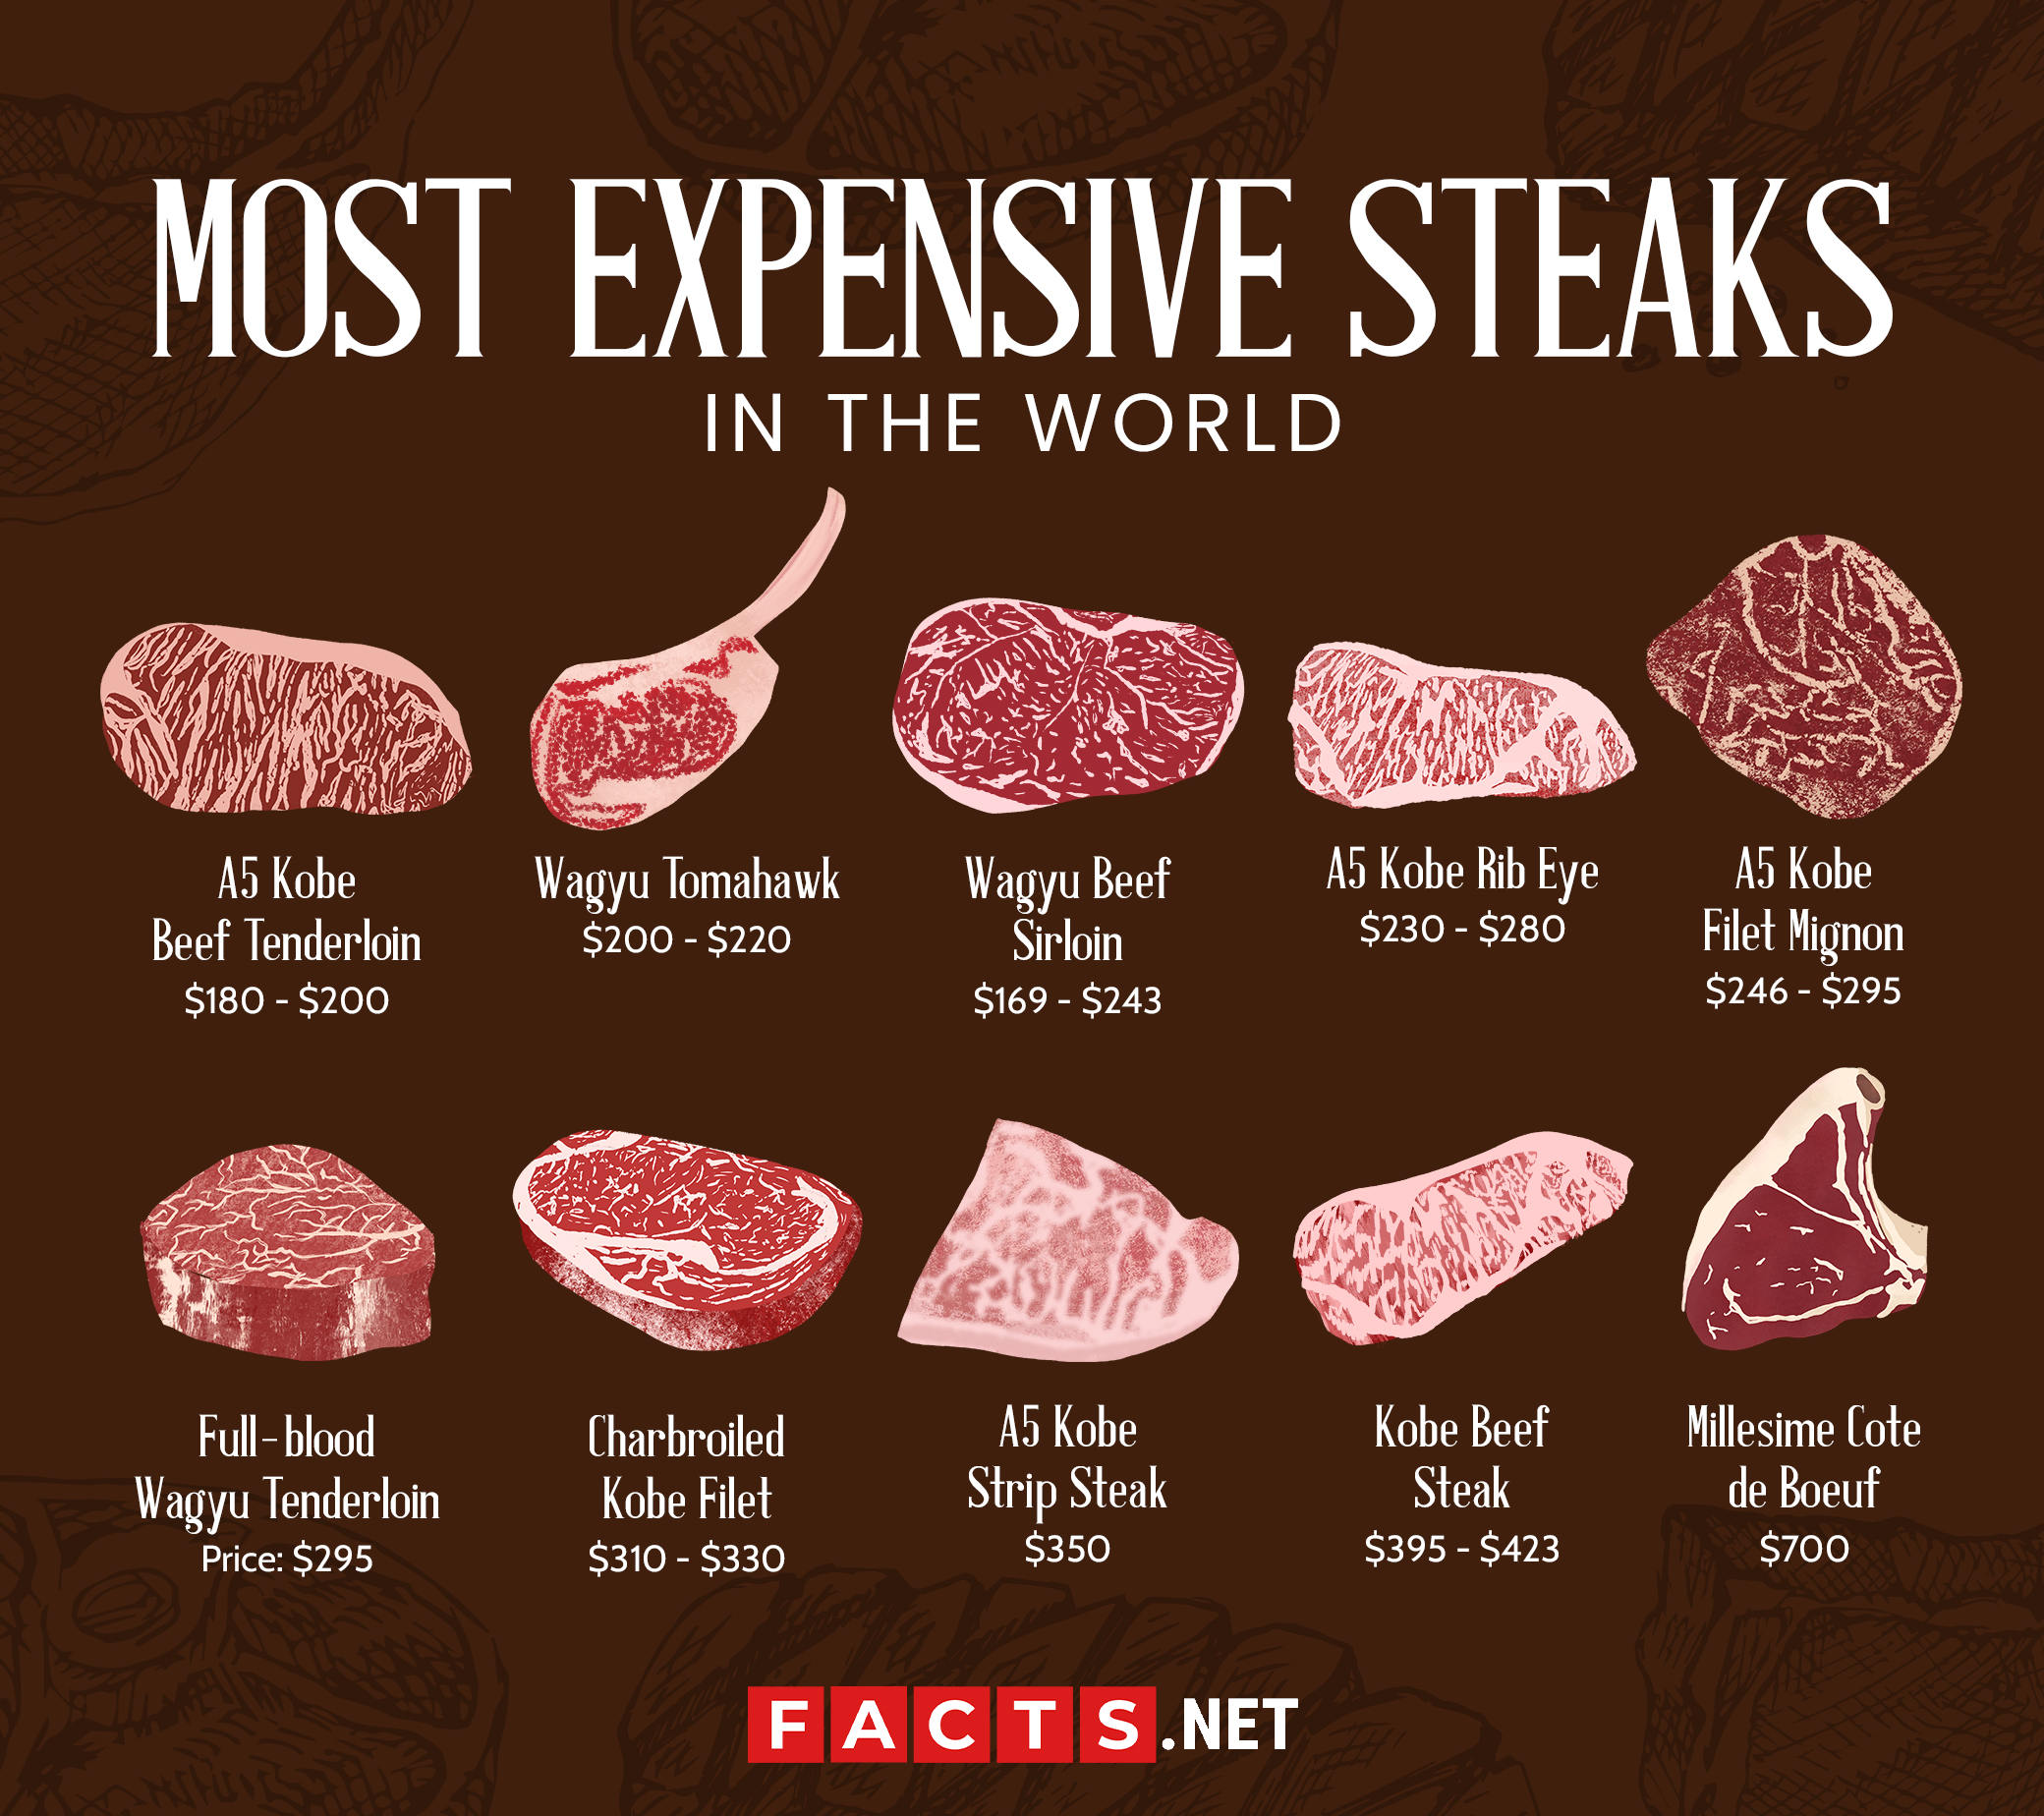 What is expensive steak called?